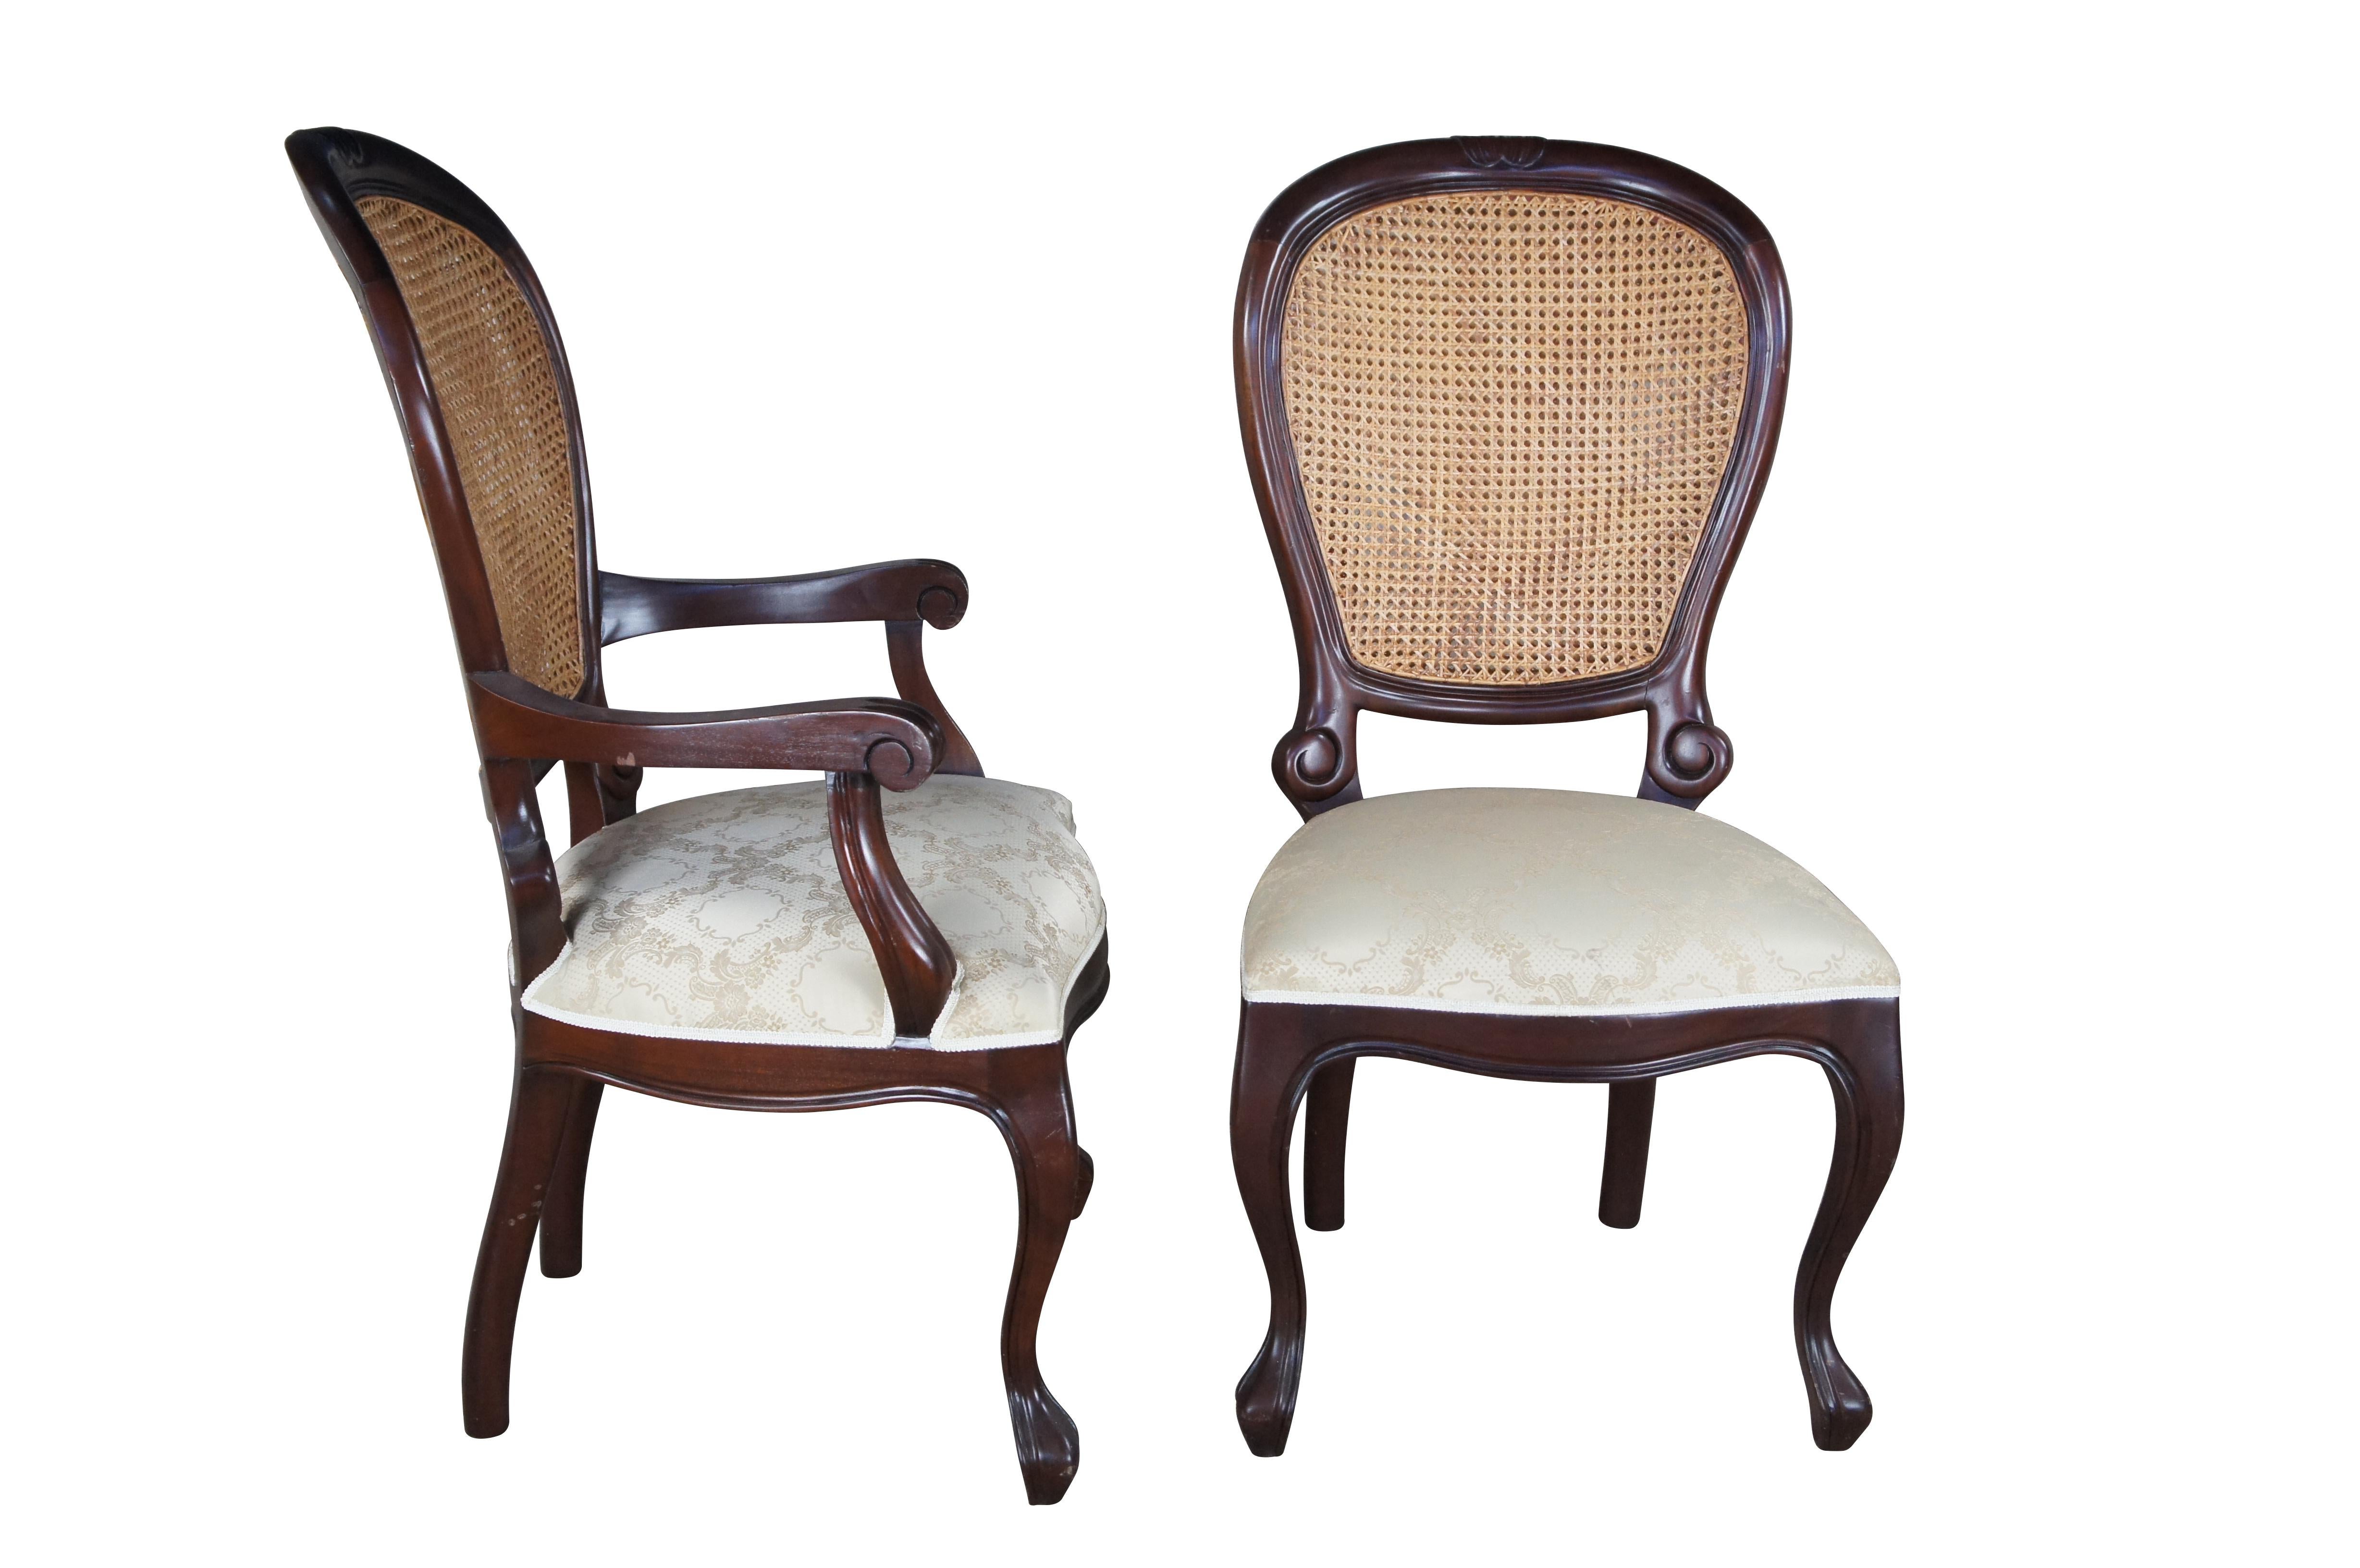 3 Victorian Revival Mahogany Balloon Back Caned Dining Chairs Silk Brocade Seats In Good Condition For Sale In Dayton, OH